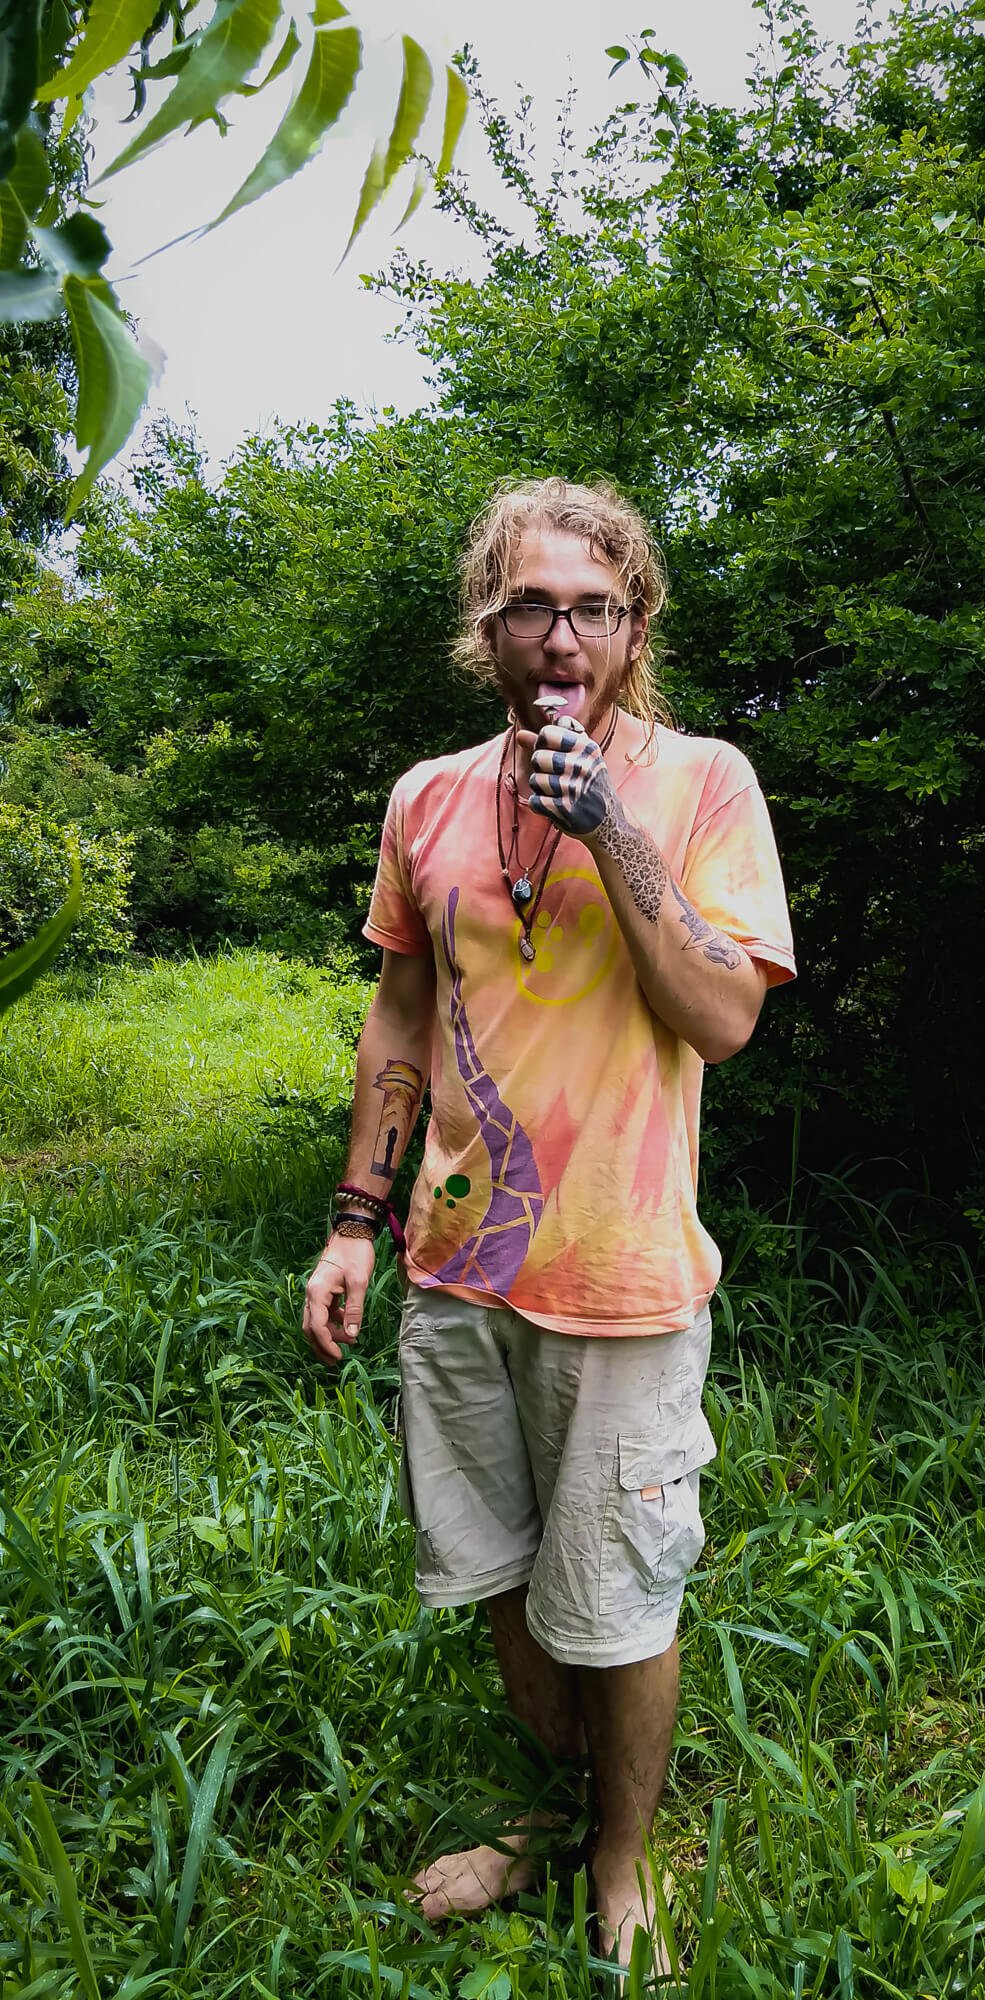 A backpacker enjoying the drug tourism in Africa holds some freshly picked shrooms